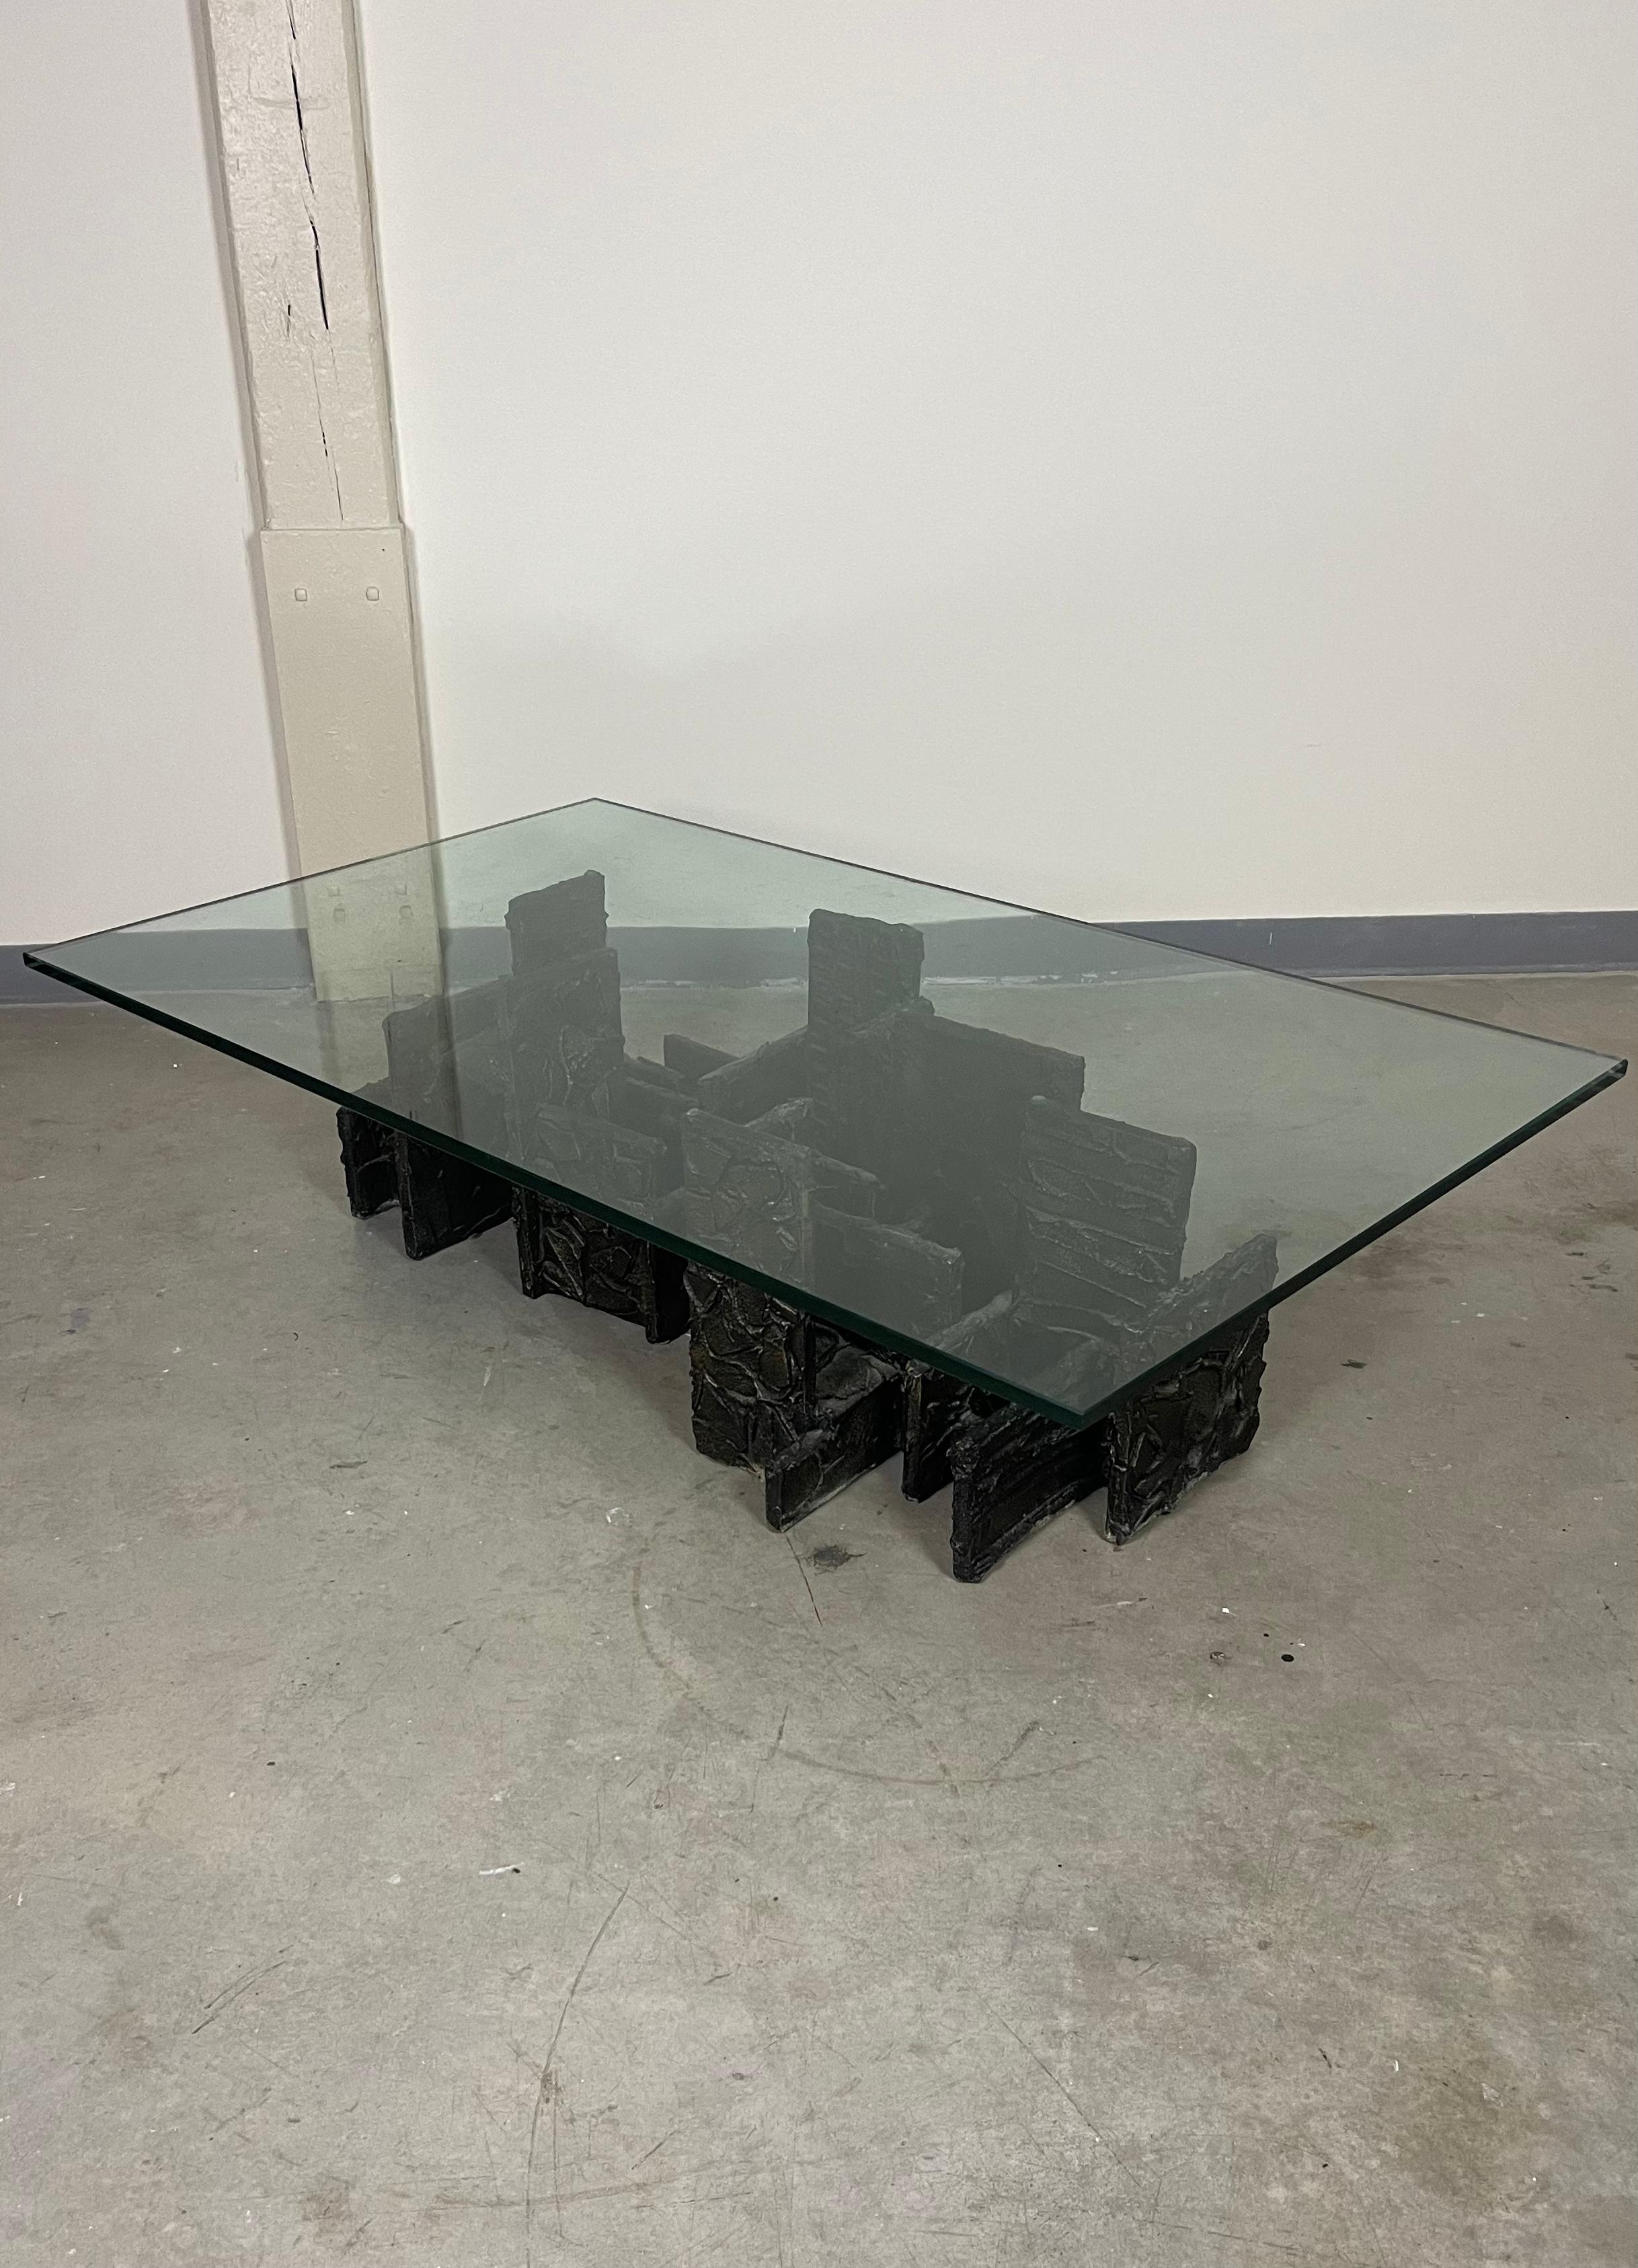 Model PE-131 coffee table in sculpted bronze by esteemed American designer Paul Evans. This piece is inscribed as “PE 71” in the bronze, indicative that the piece was created by Evans in 1971. Current glass contains surface scratches, recommended to